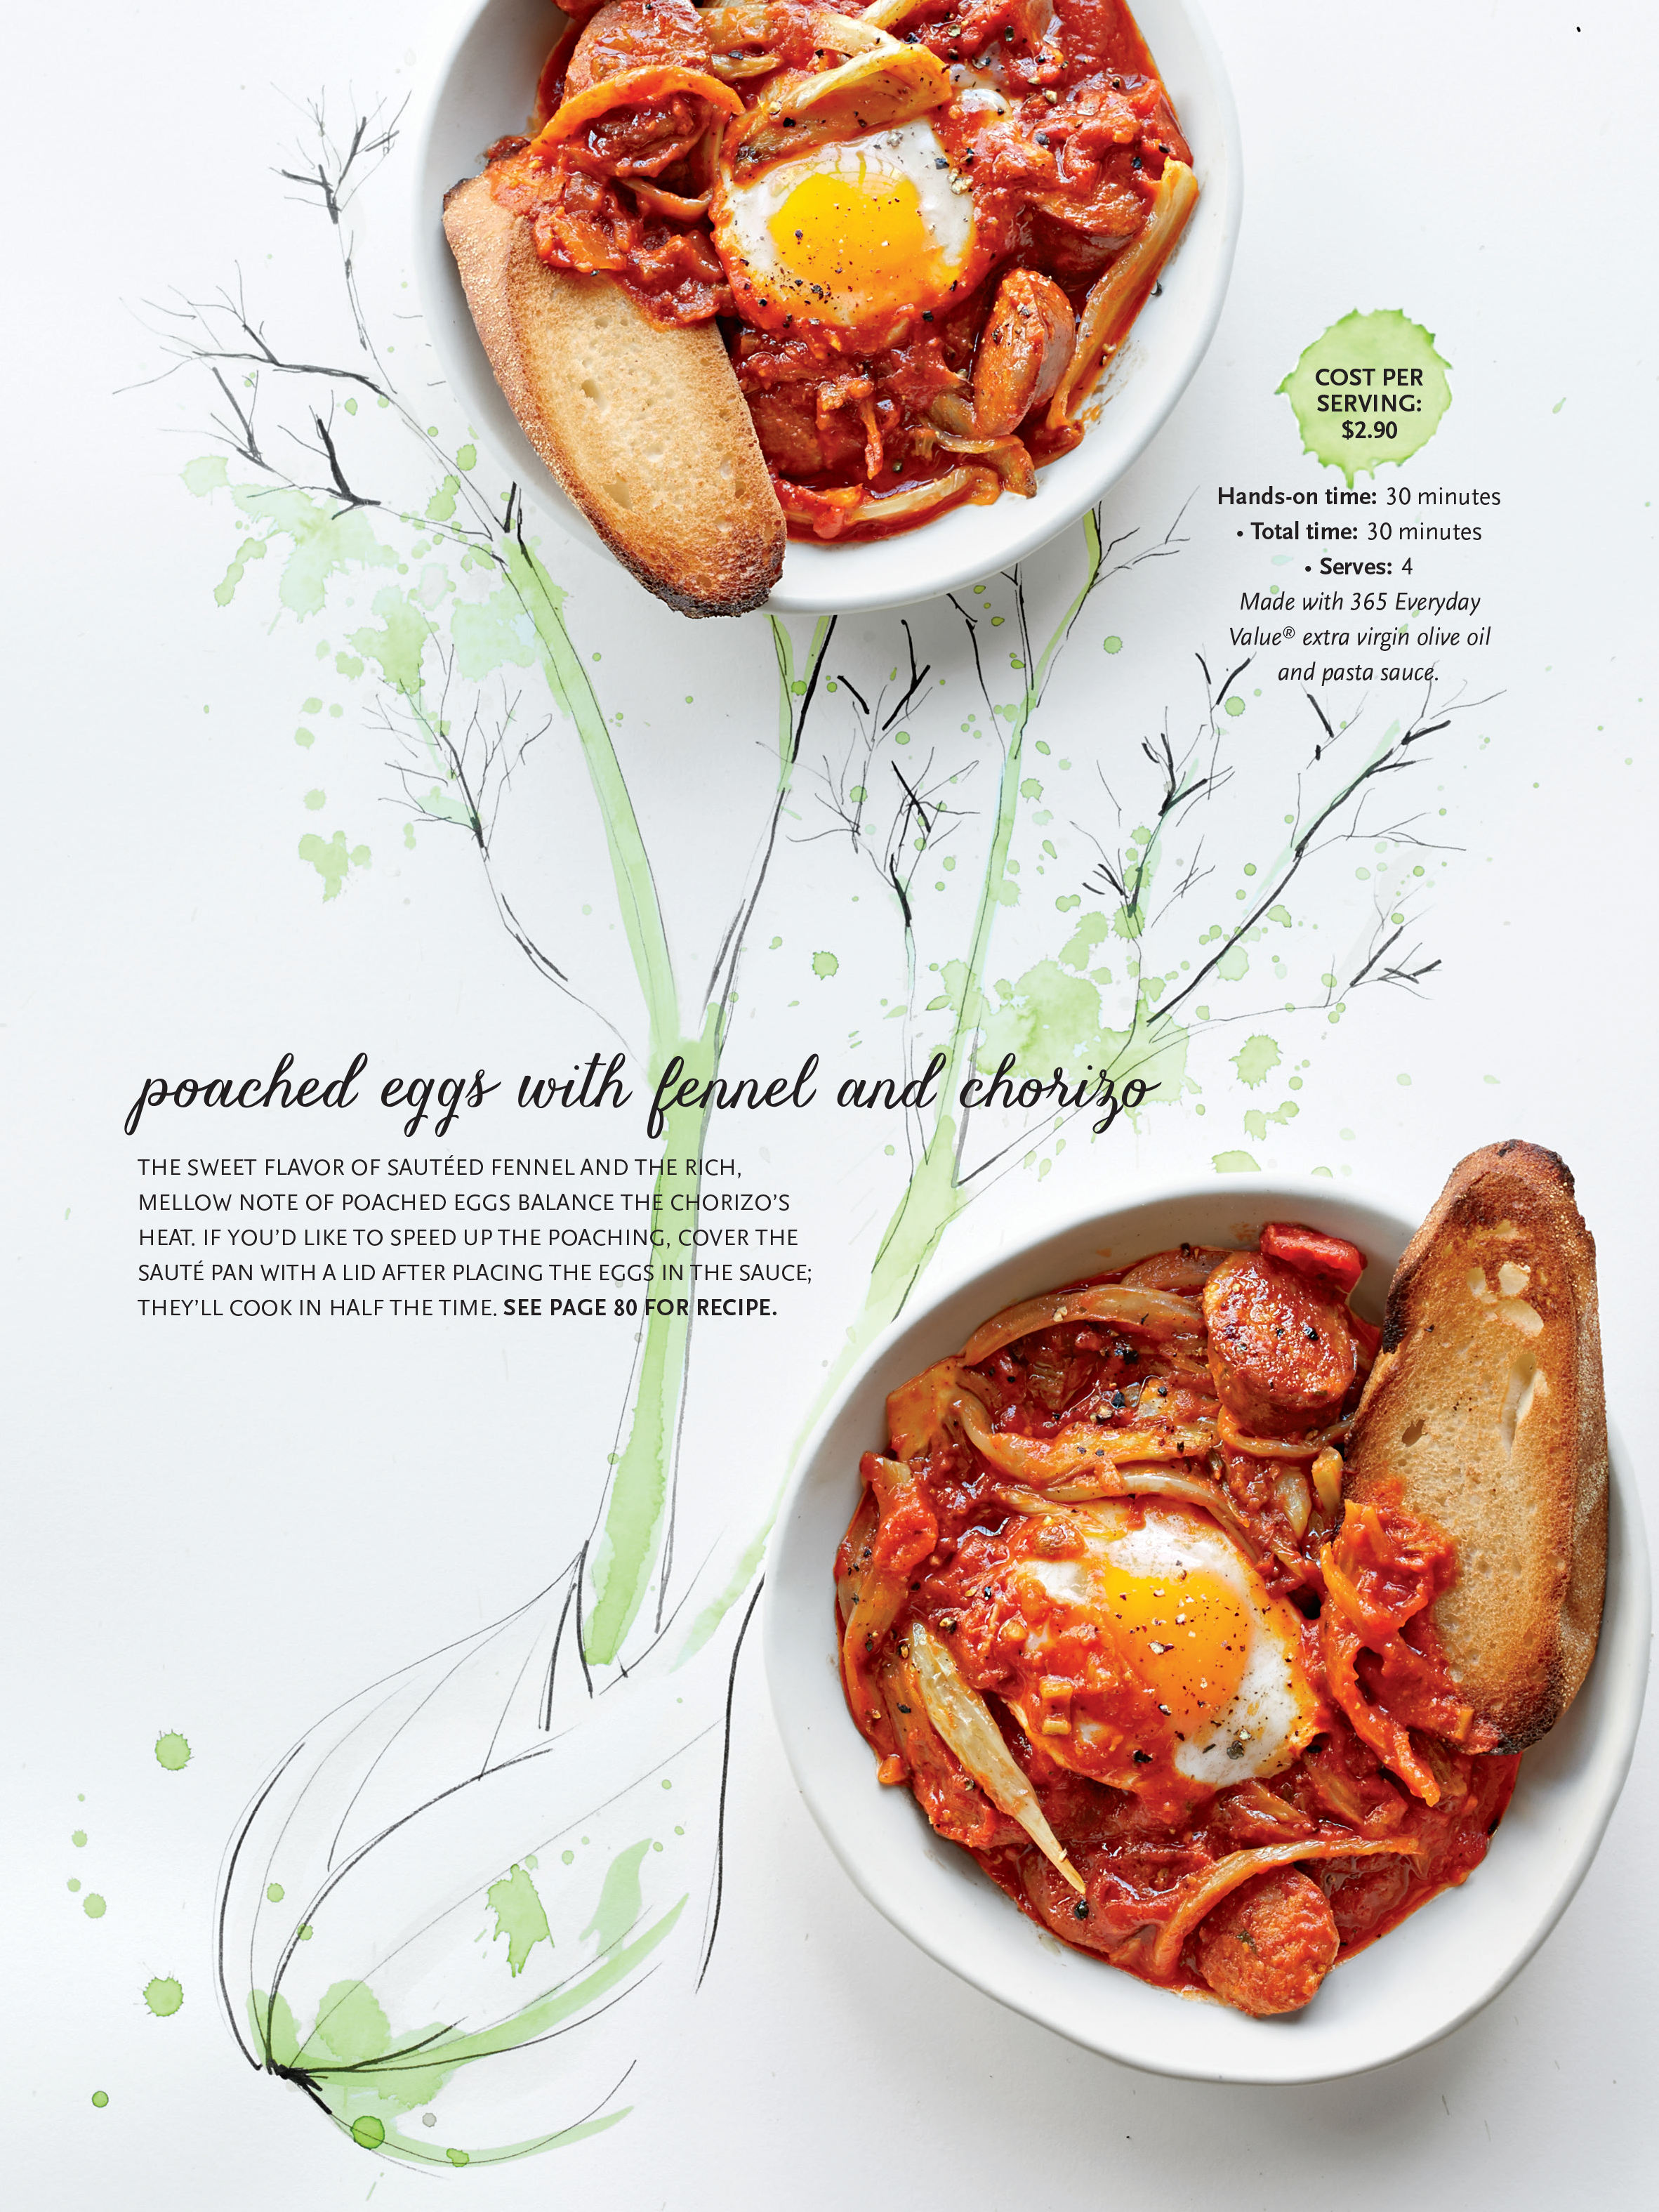  Con Poulos, 2015  Illustrations: Rachel Nosco  Food Styling: Simon Andrews,&nbsp;Prop Styling: Paige Hicks 